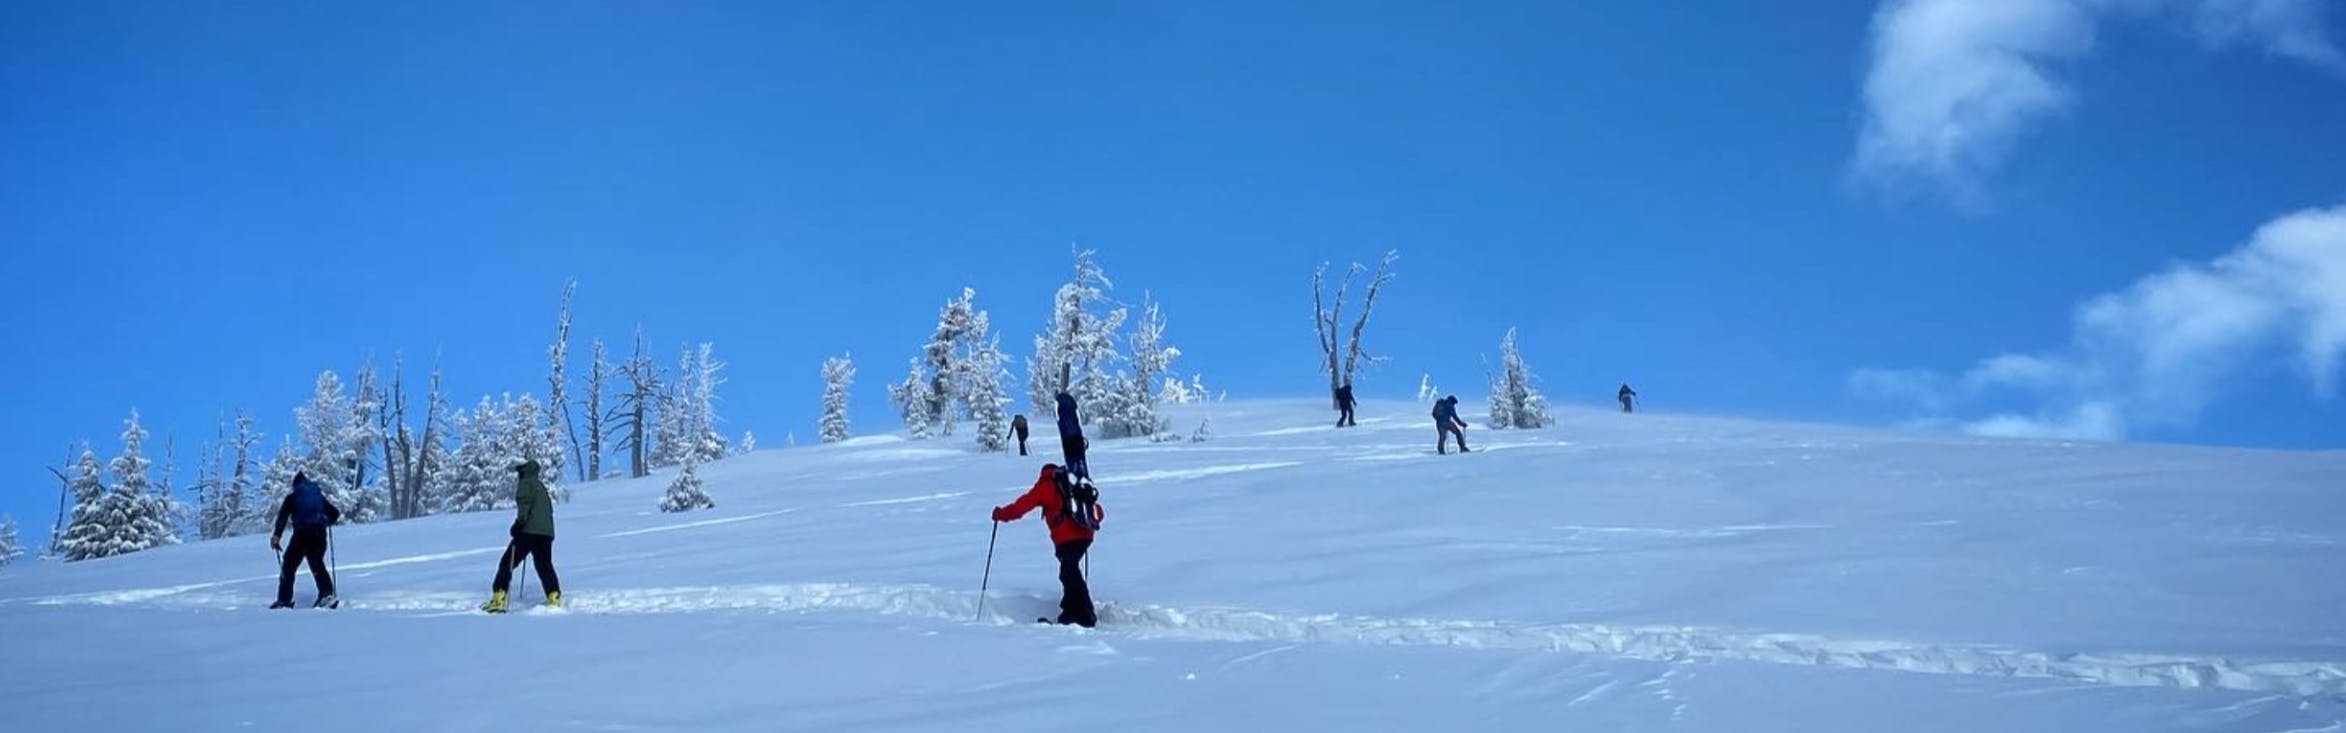 Several skiers walking up a snowy ski hill. 